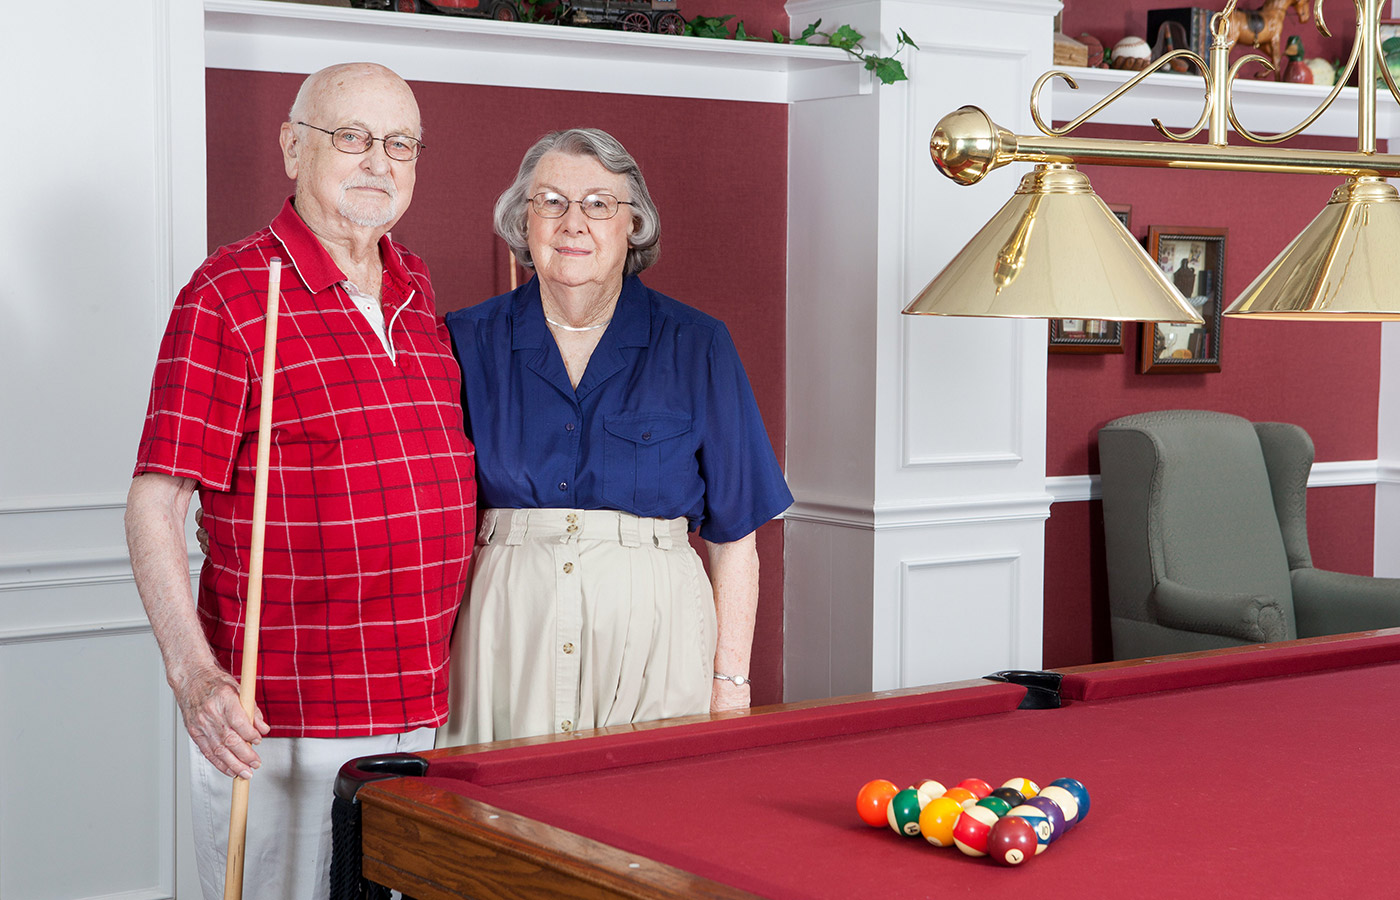 Two residents are playing pool.